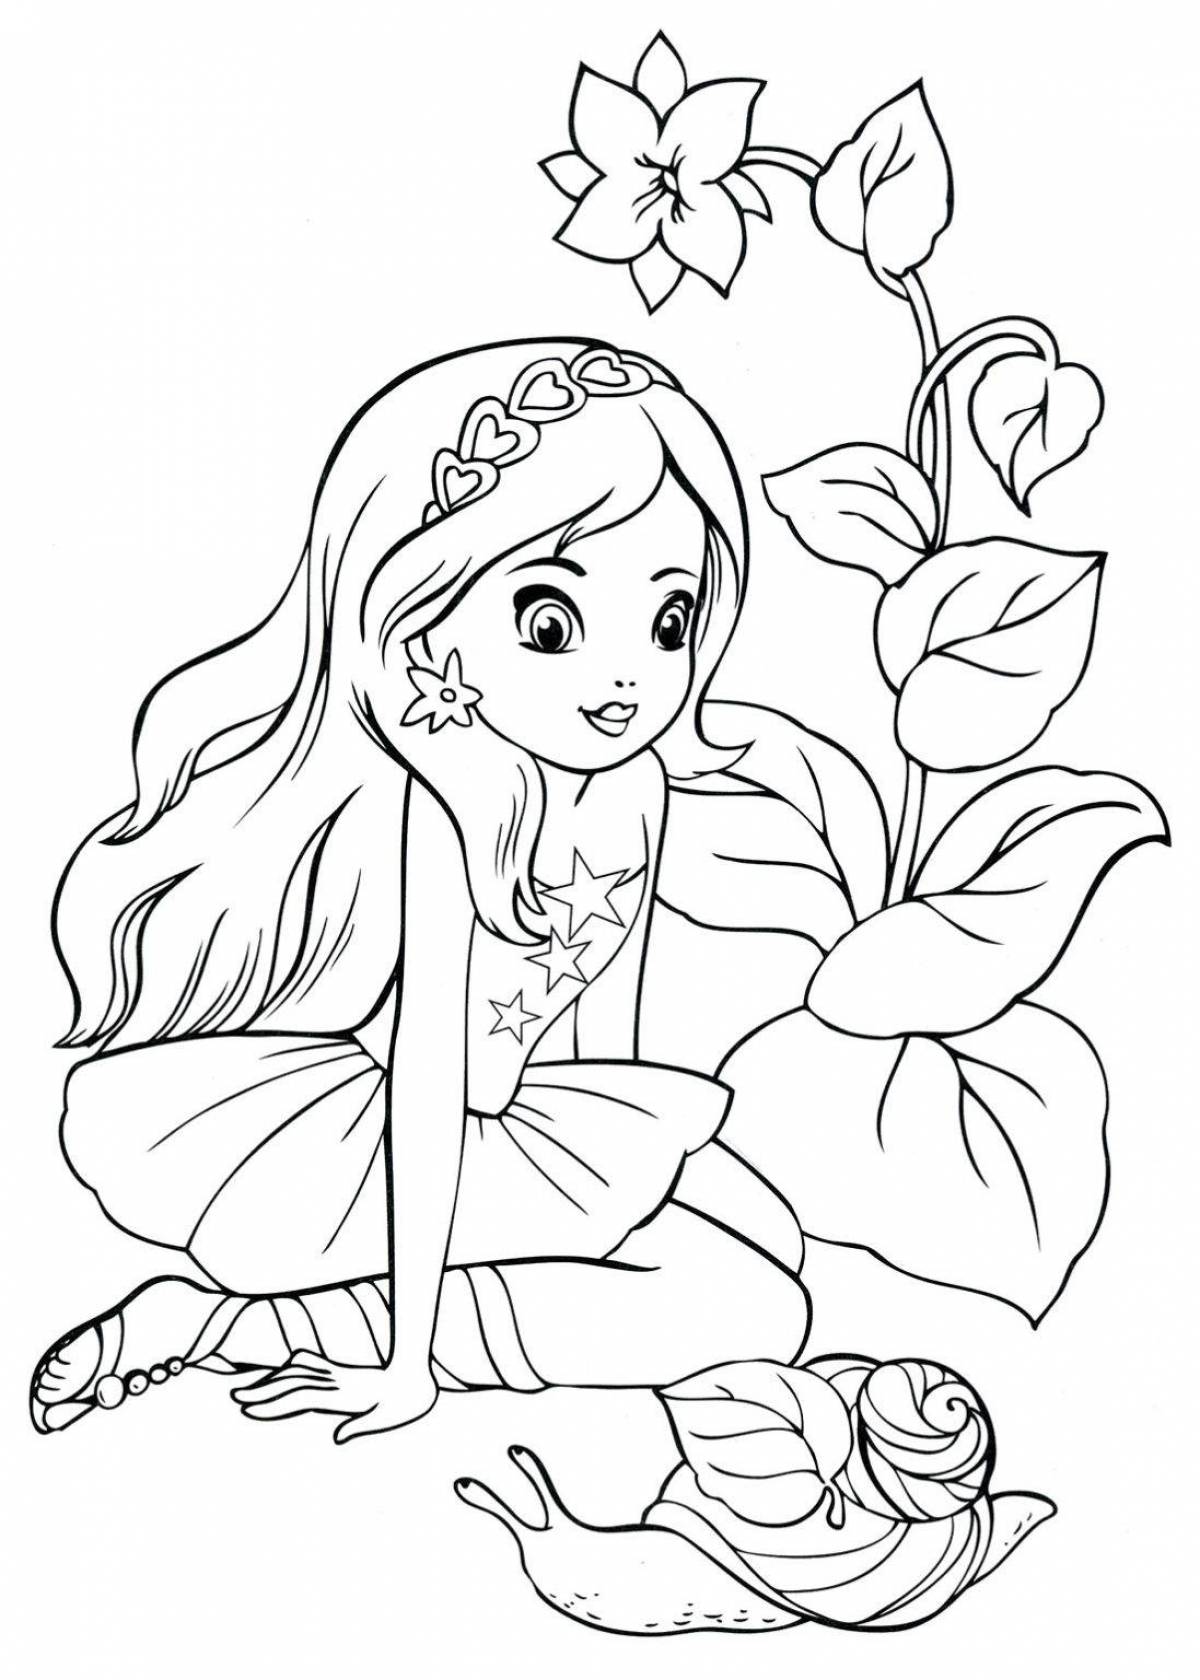 Exquisite coloring book for girls 6 years old